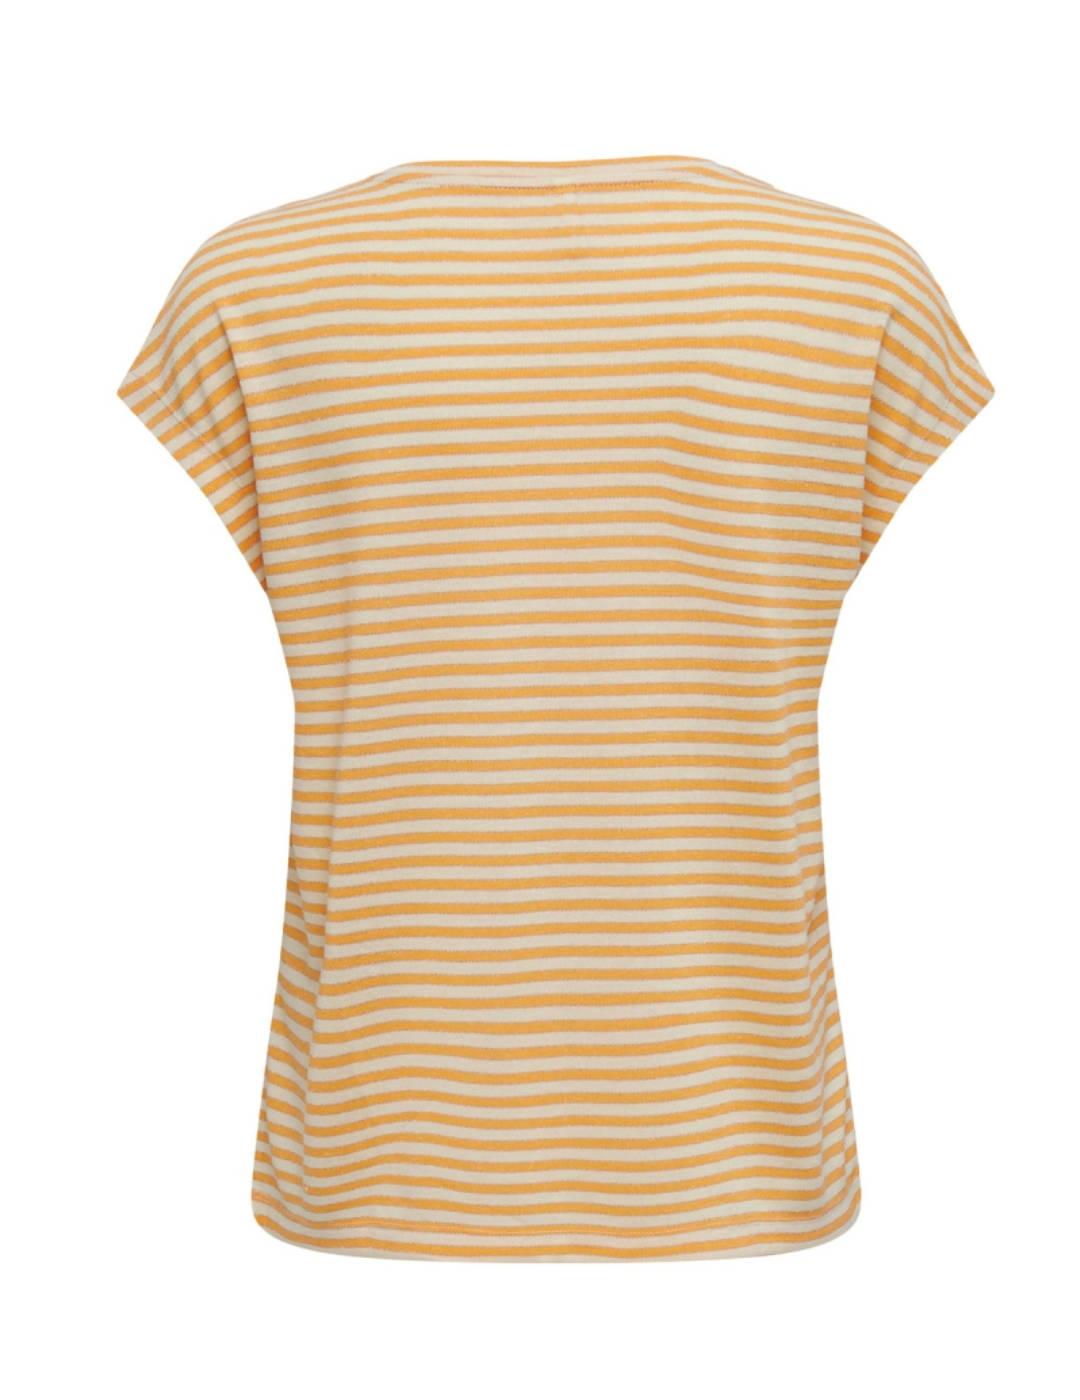 Camiseta Only Cannes beige y naranja a rayas de mujer